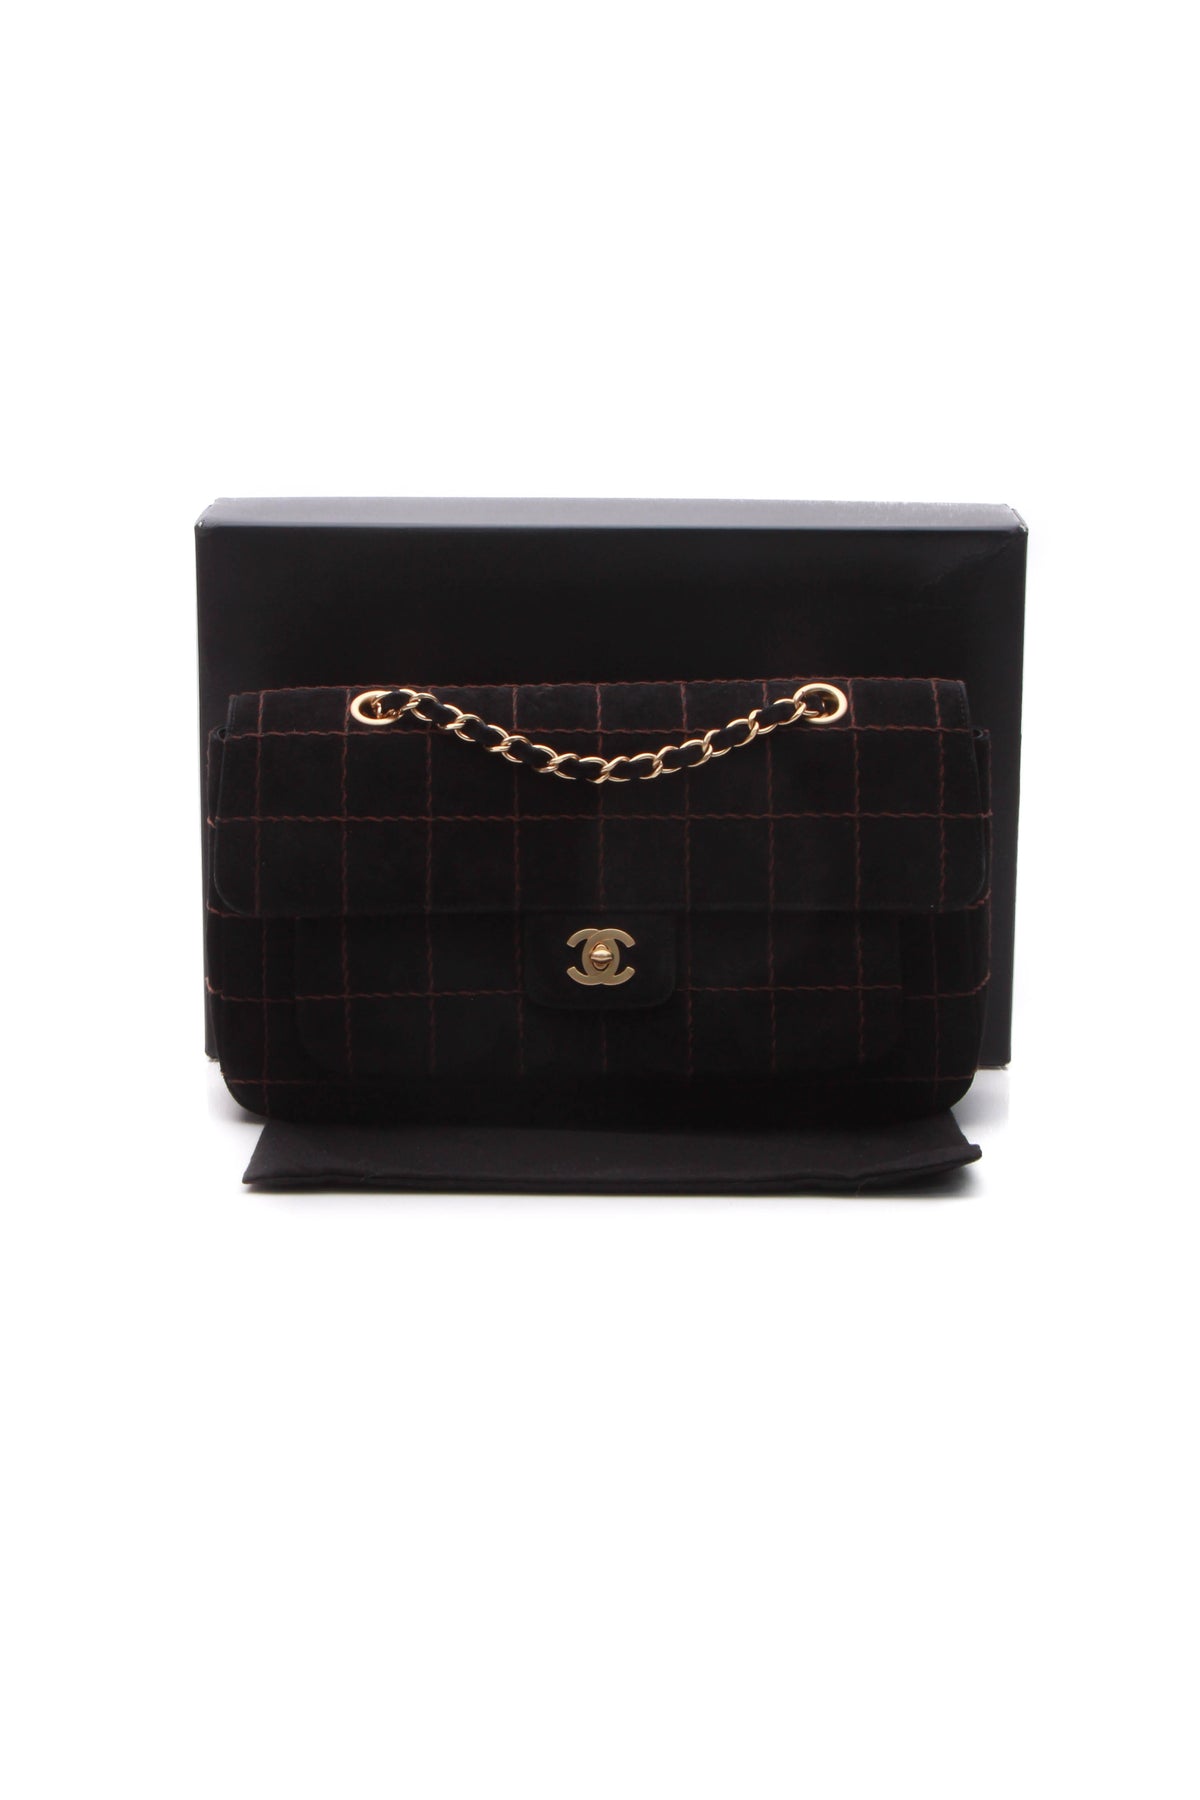 What is the Price of a Chanel Flap Bag? - Couture USA